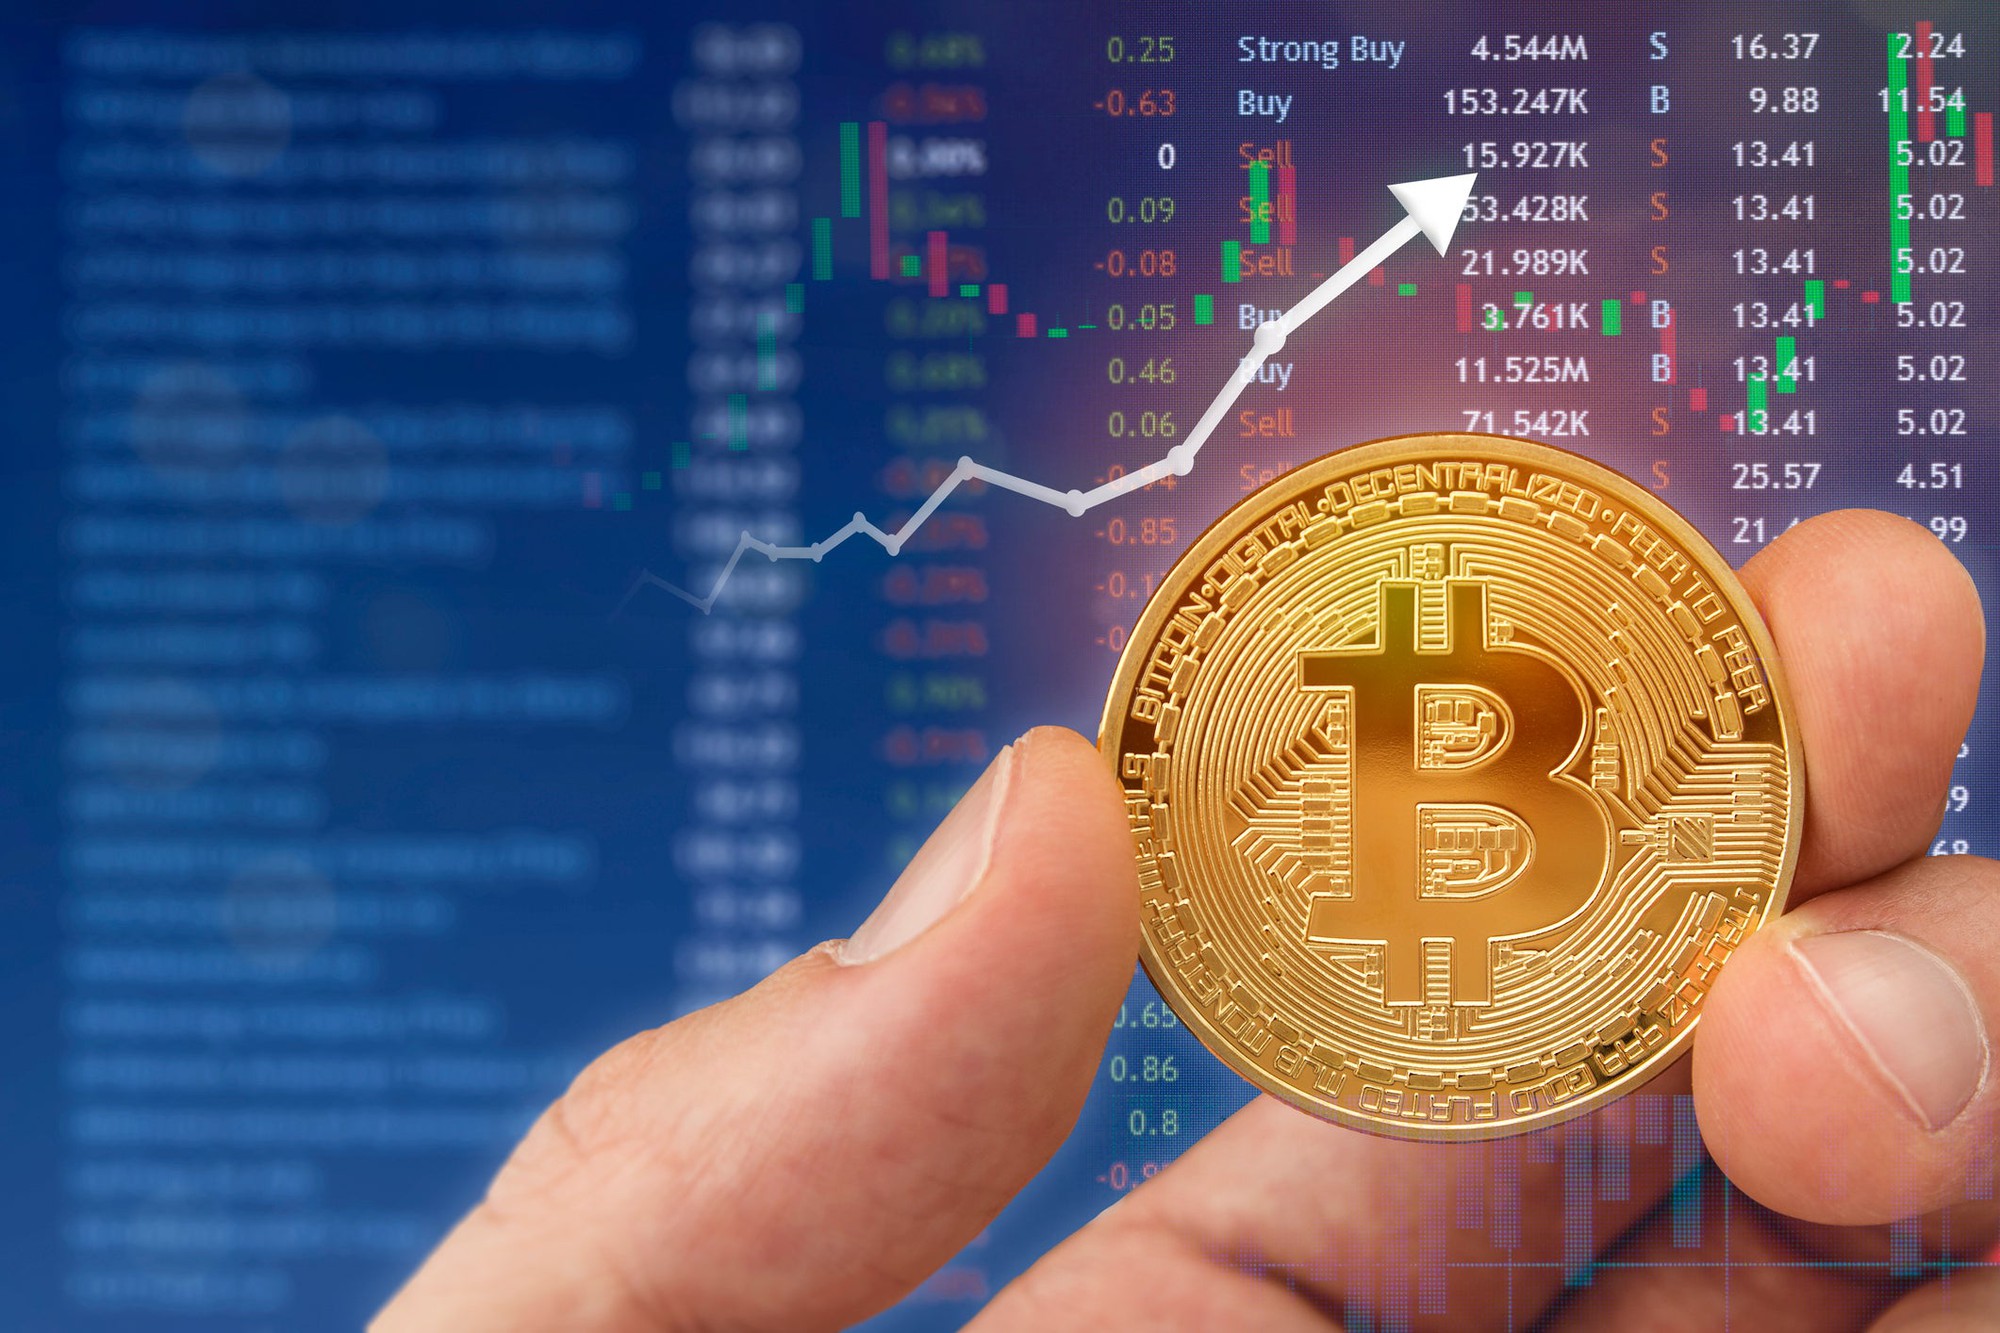 market crash, Crypto bubble named among top economic trends in 2022 — is crash imminent?